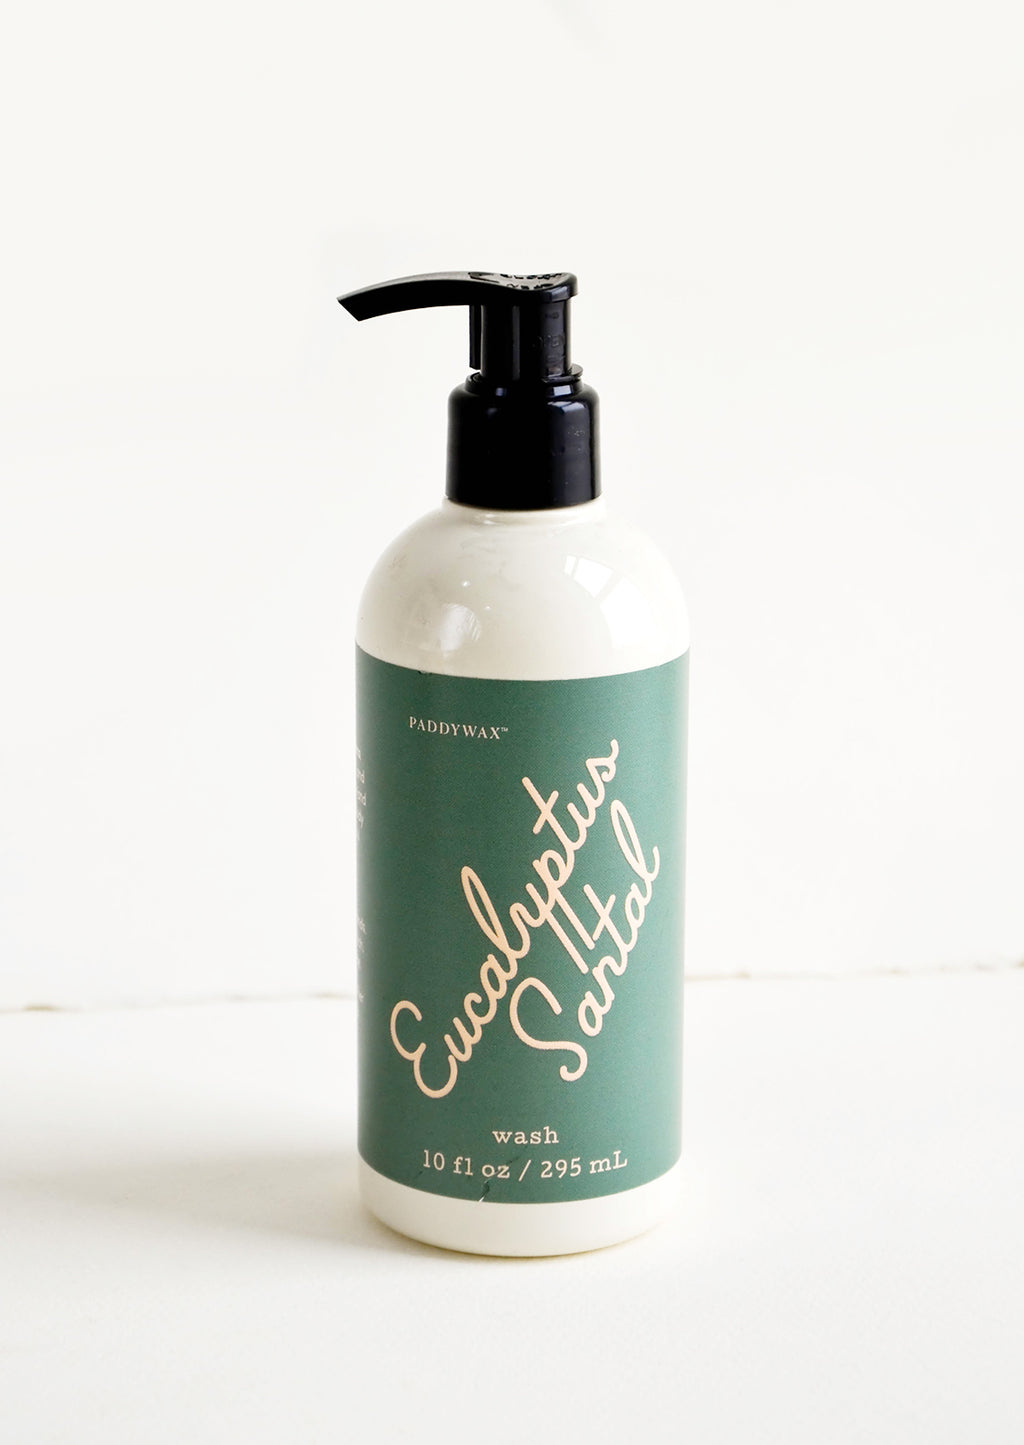 Eucalyptus Santal: Liquid soap packaged in ivory and black pump bottles with pink and dark green label